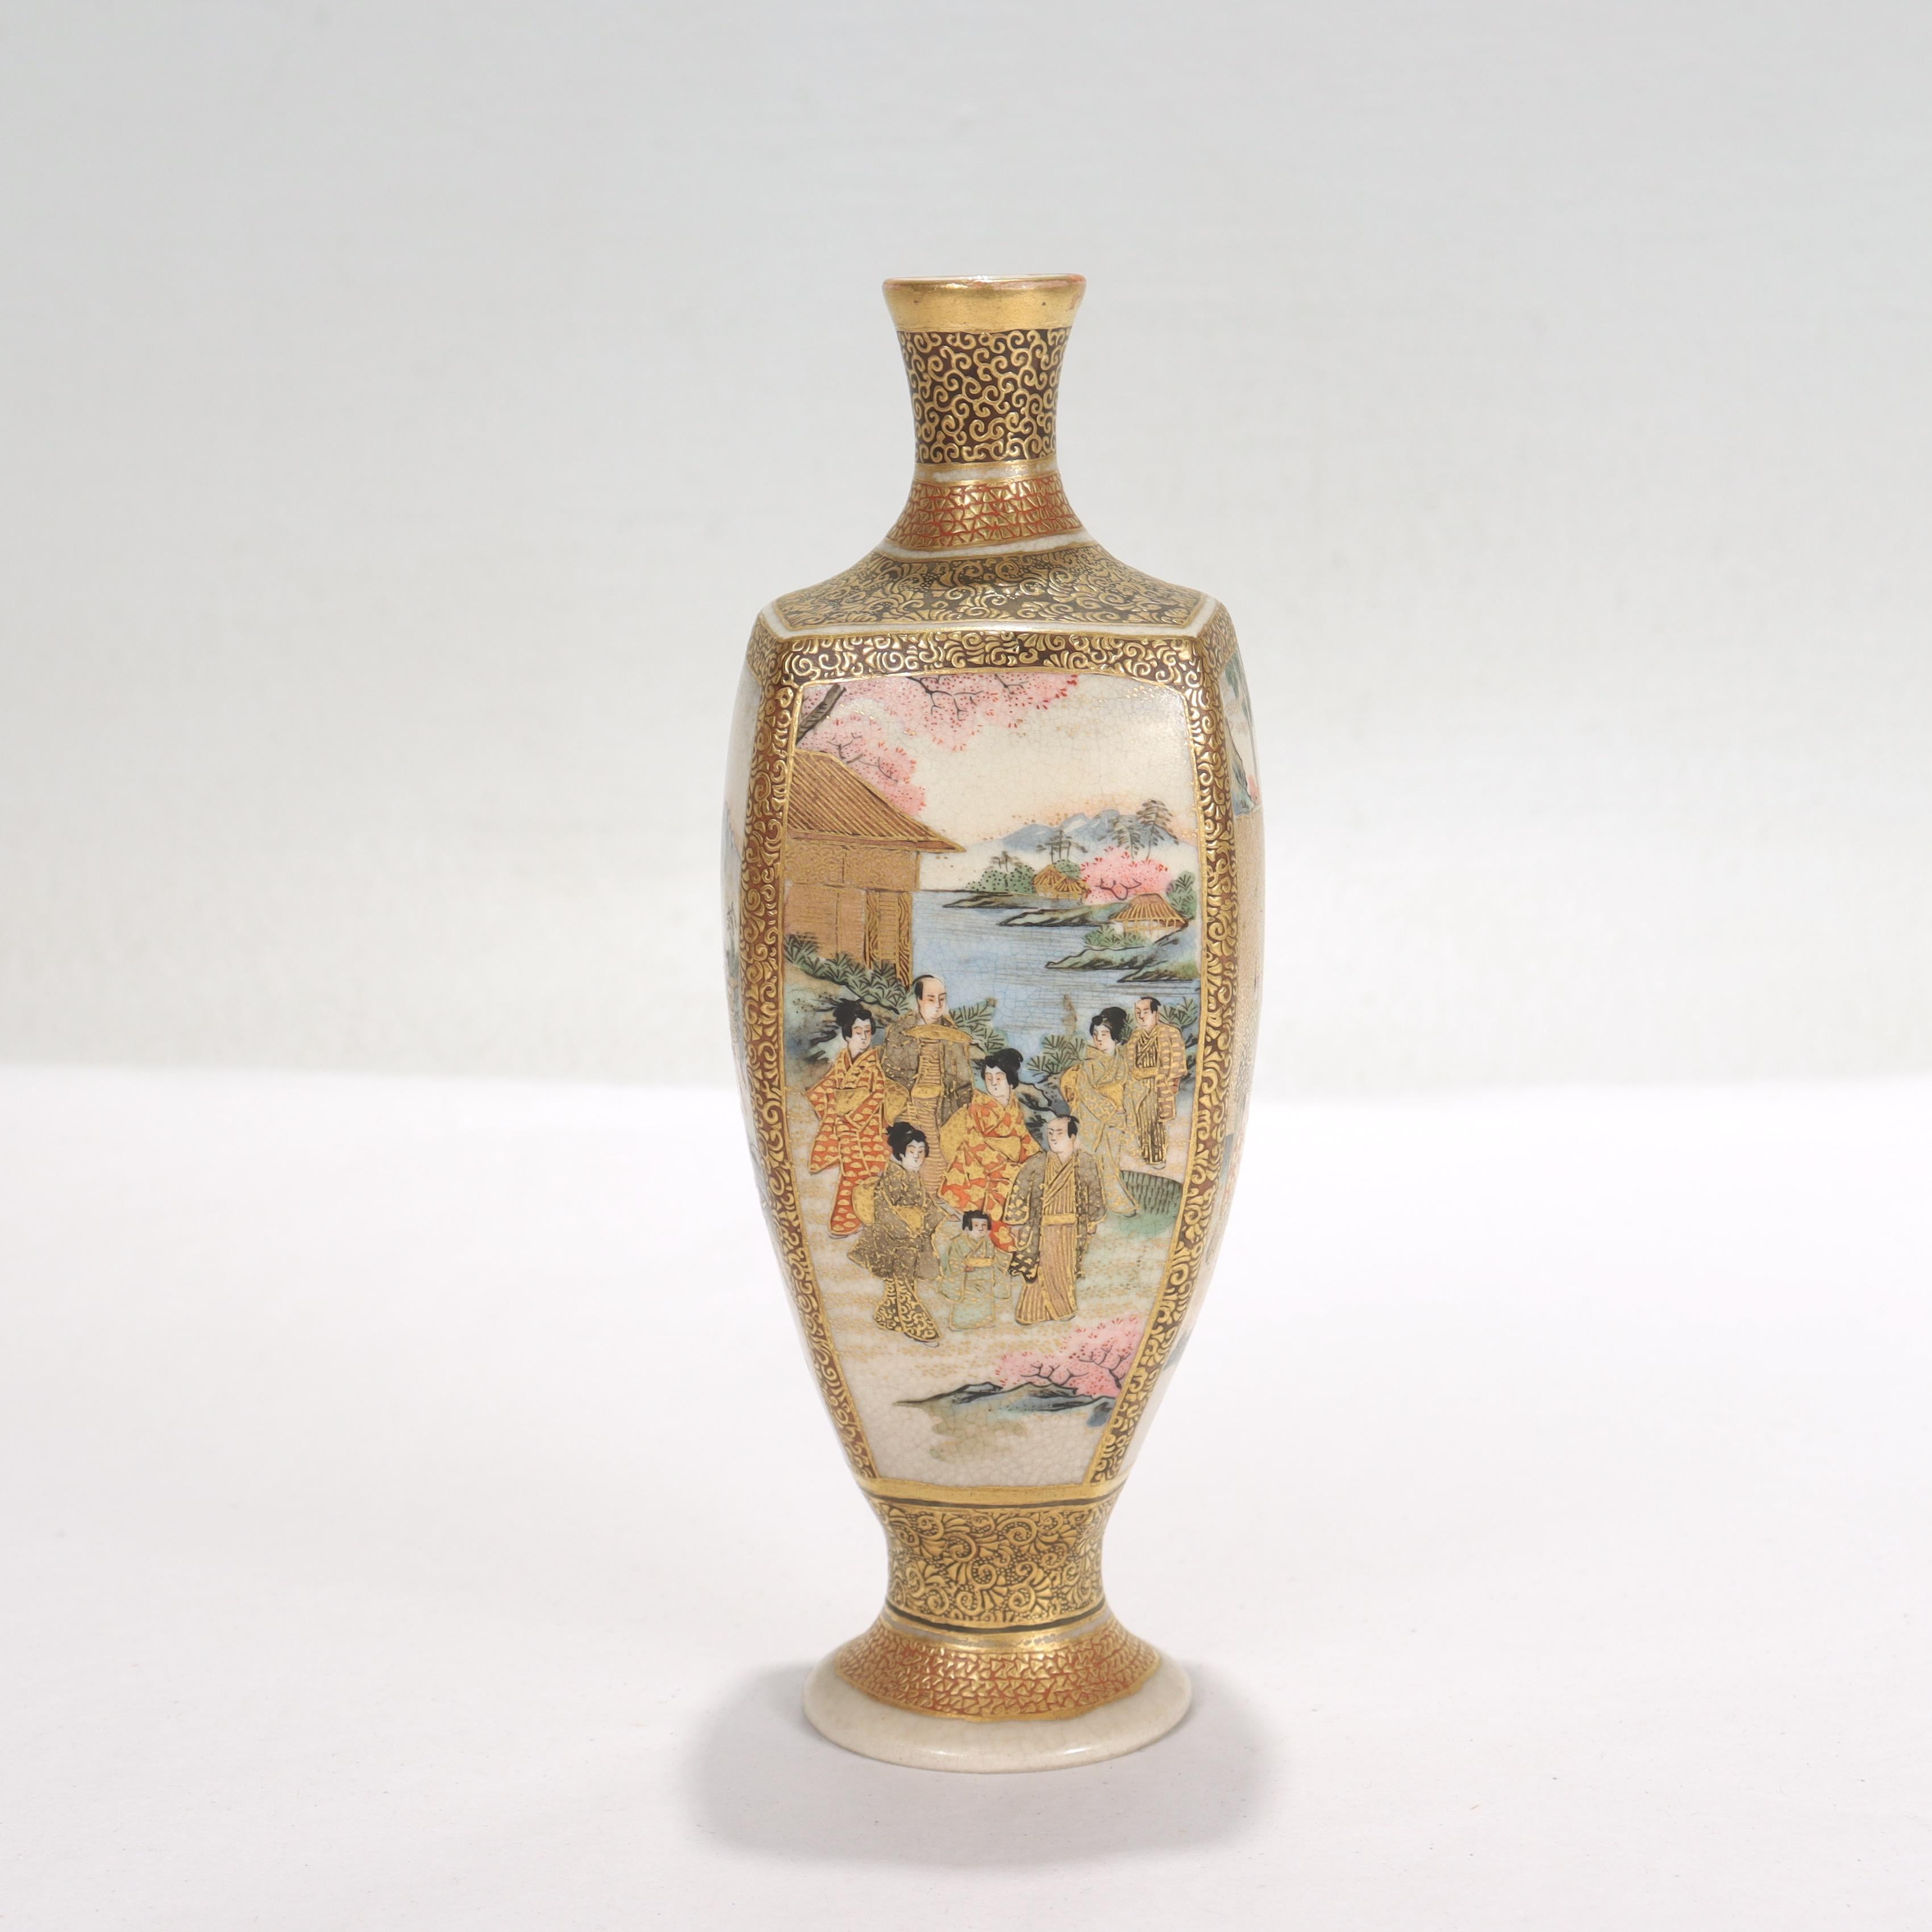 A fine antique Japanese Satsuma porcelain miniature vase.

With enameled scenes to all sides and rich raised gilt highlights throughout. 

Marked to the base with a Satsuma cross in circle mark and Japanese characters that translate to 